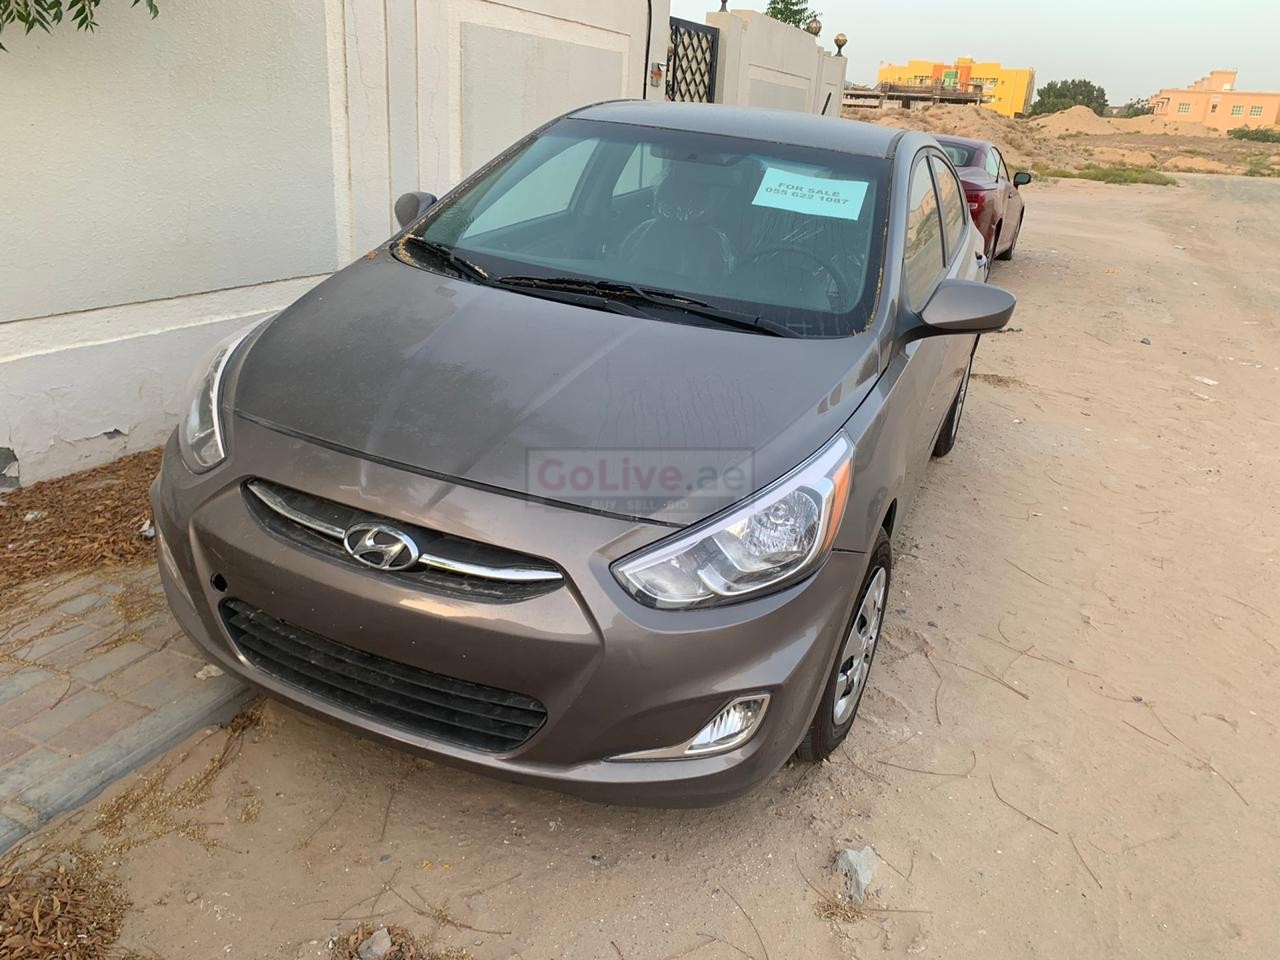 HYUNDAI ACCENT 2017 USA IMPORTED DONE 38,270 MILES